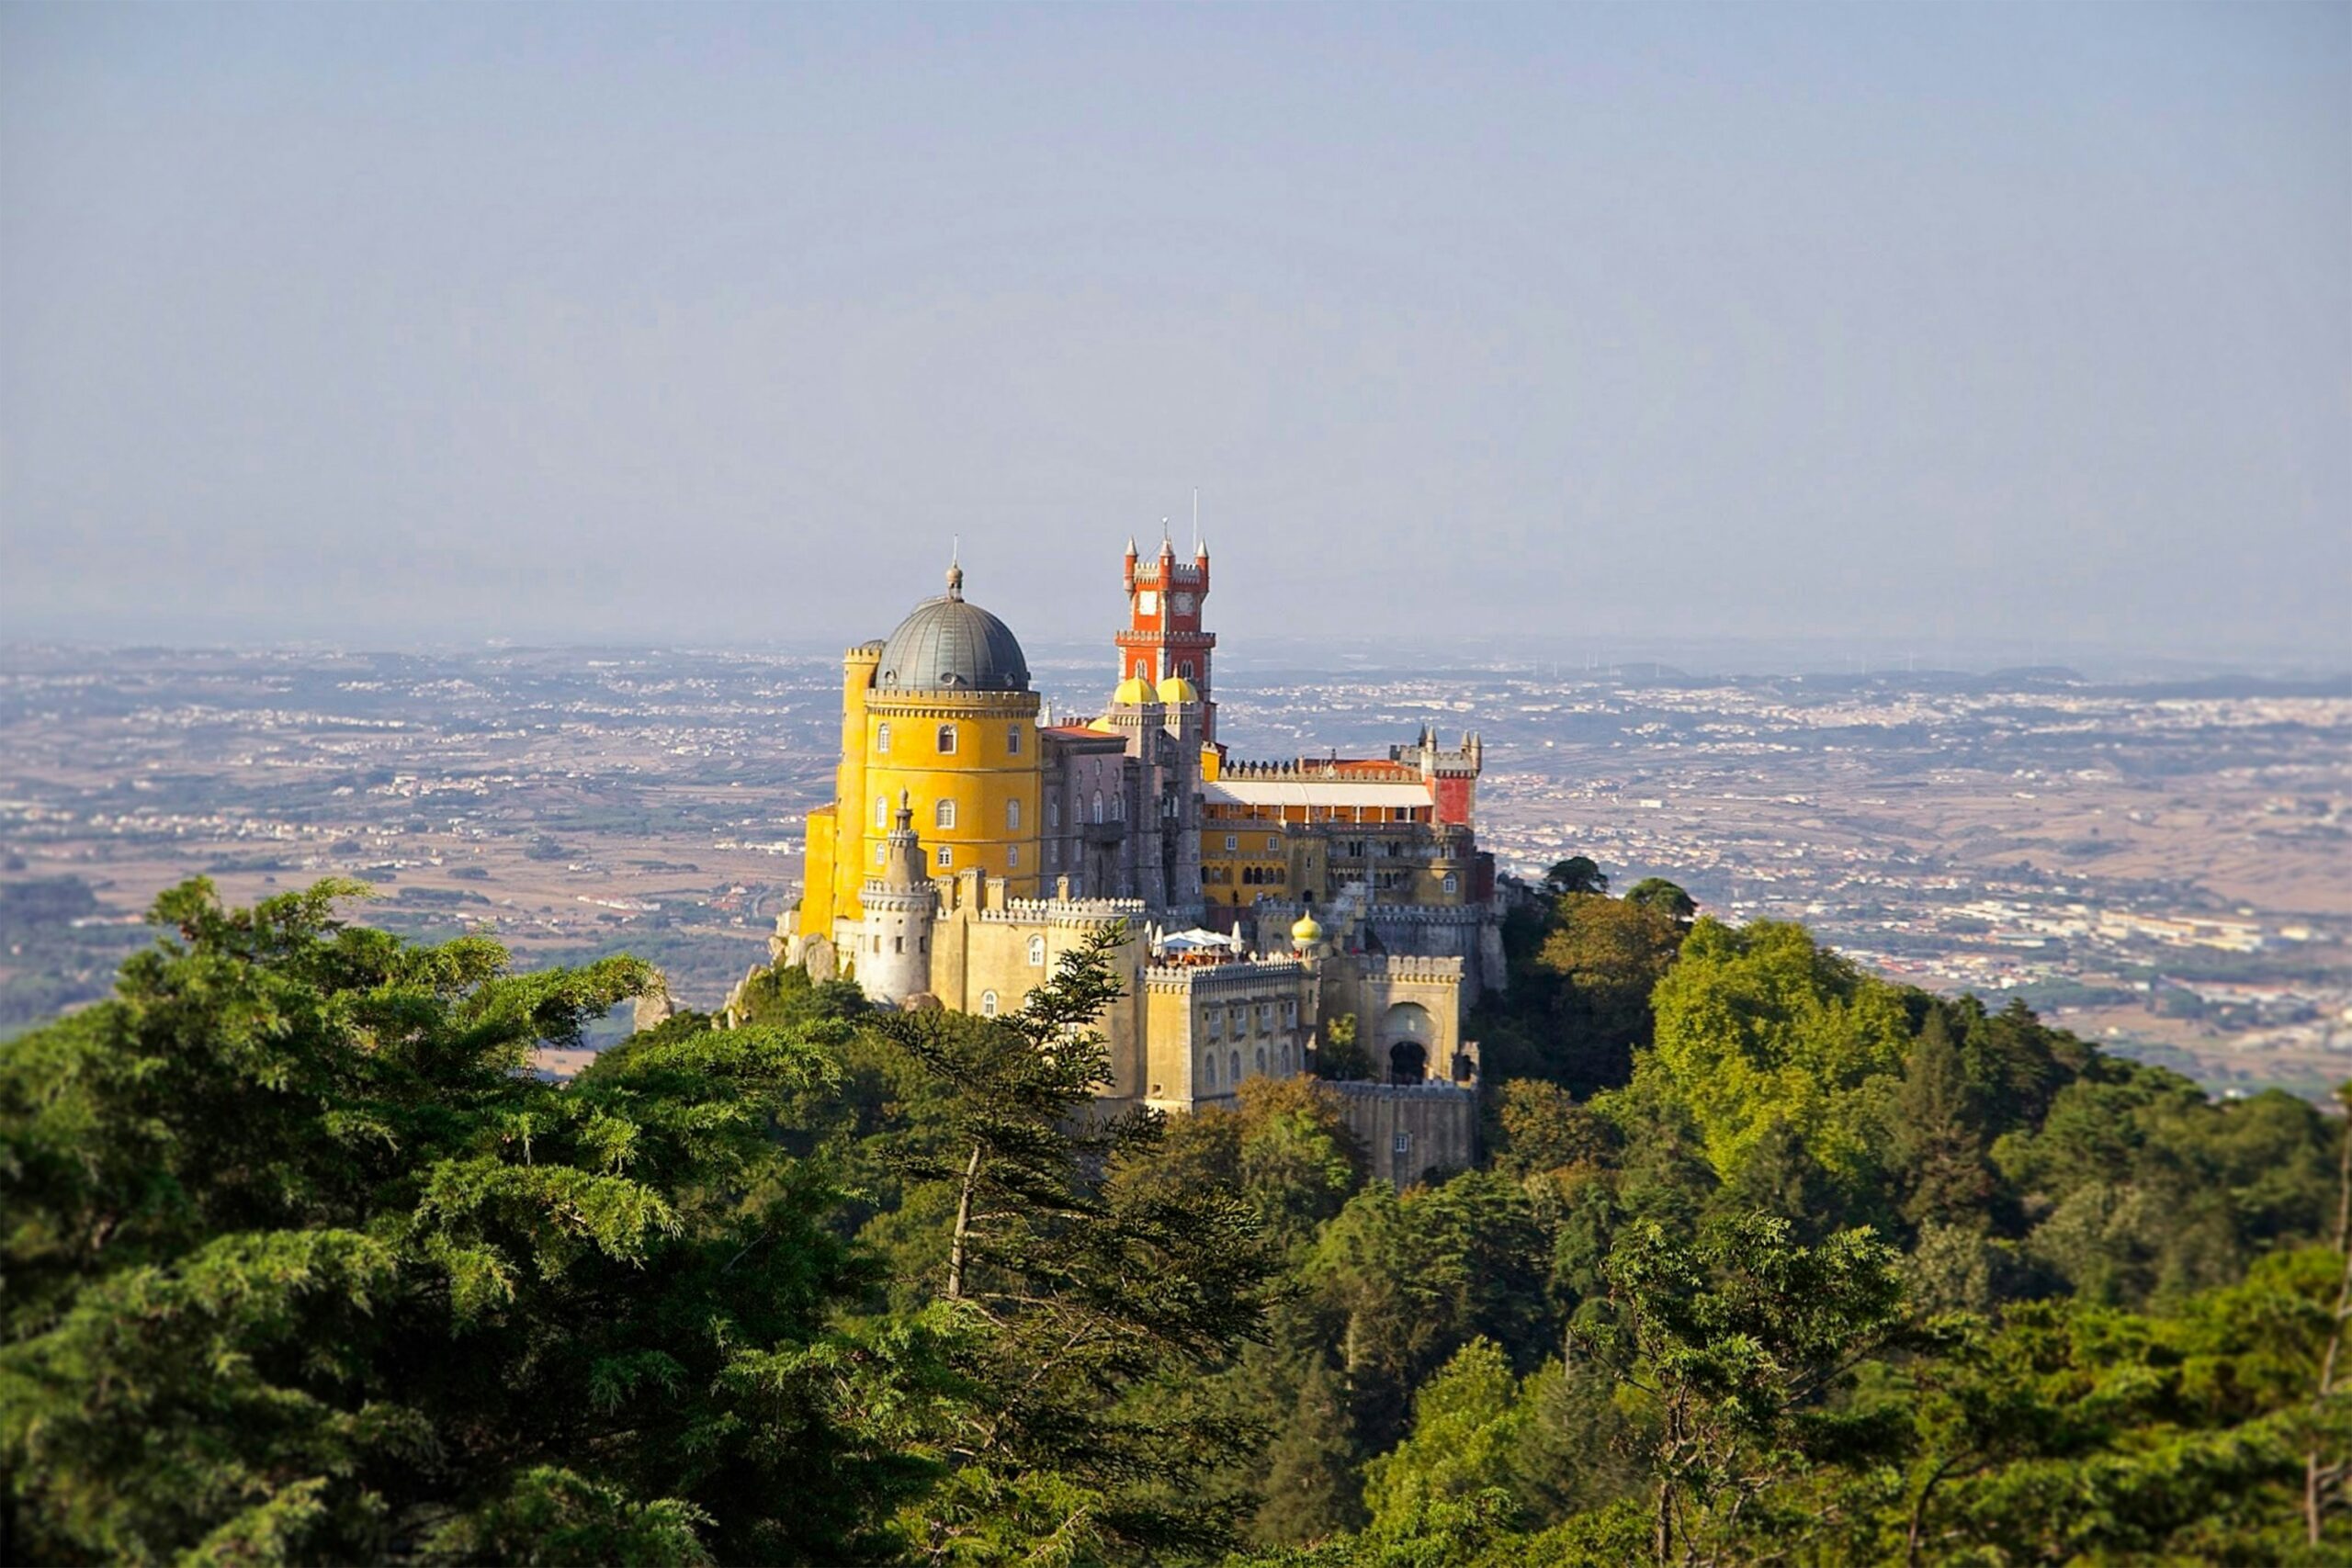 Pena Palace: The Jewel of Sintra that can be seen from Lisbon